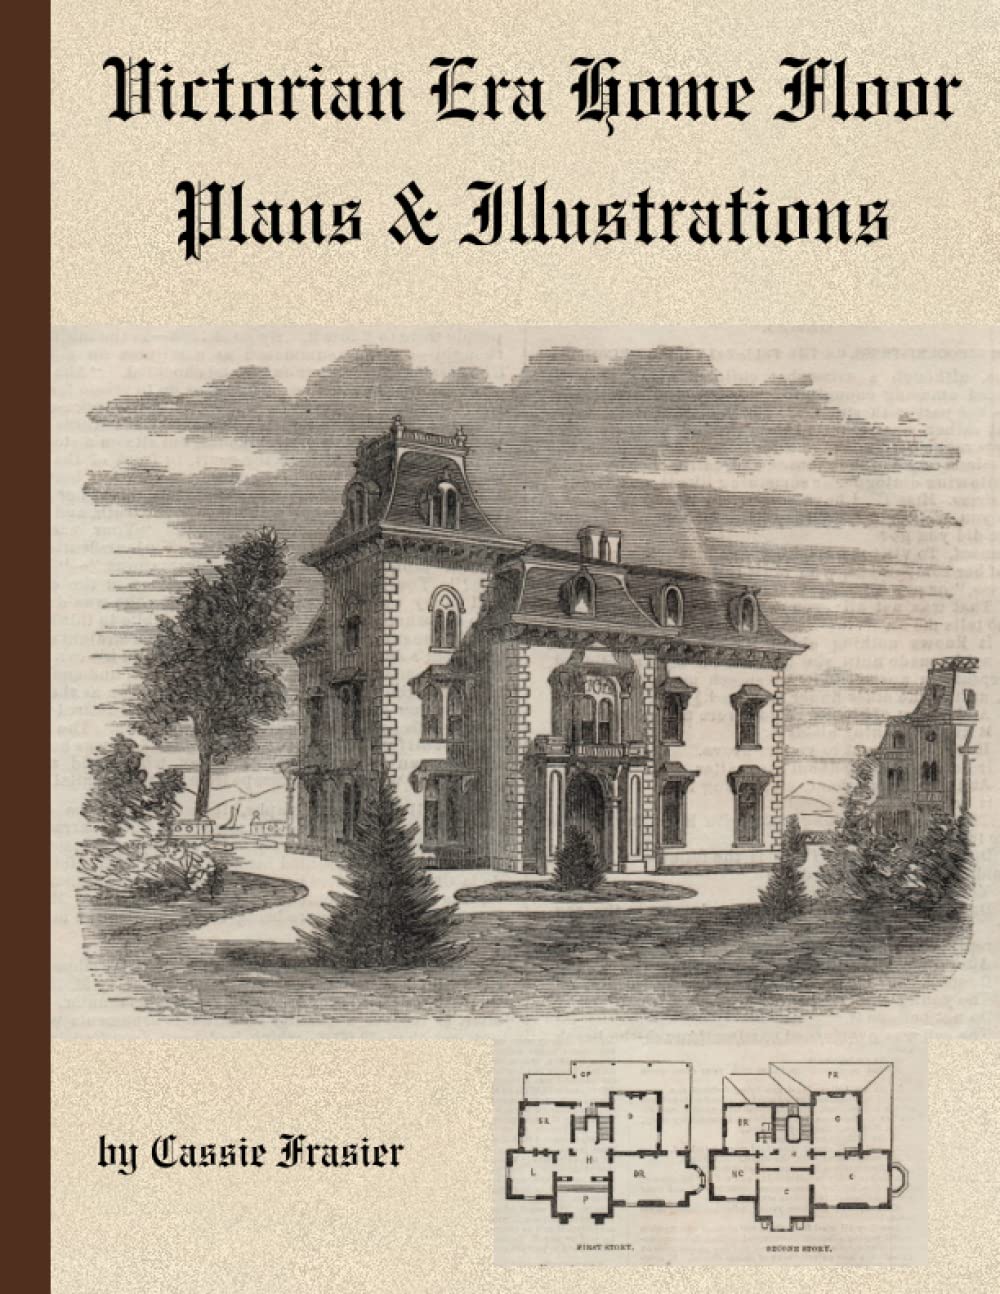 Victorian Era Home Floor Plans & Illustrations: from 1880's Magazines a Collection of 20 House Designs by Architects